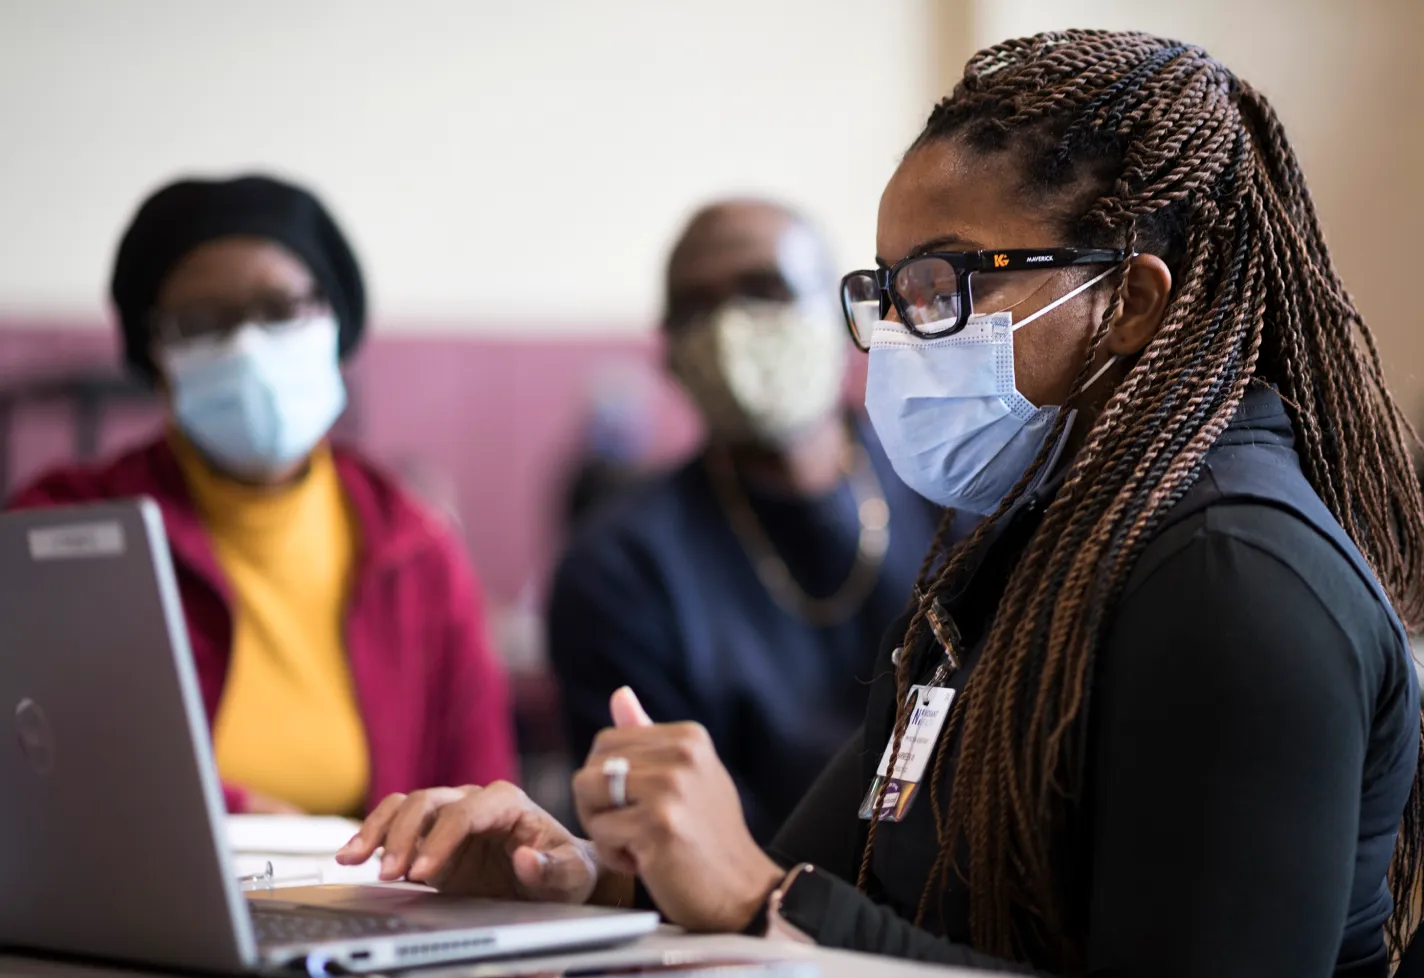 Novant Health team member and couple at a community care event. Everyone is masked and the team member is gathering information on a laptop.